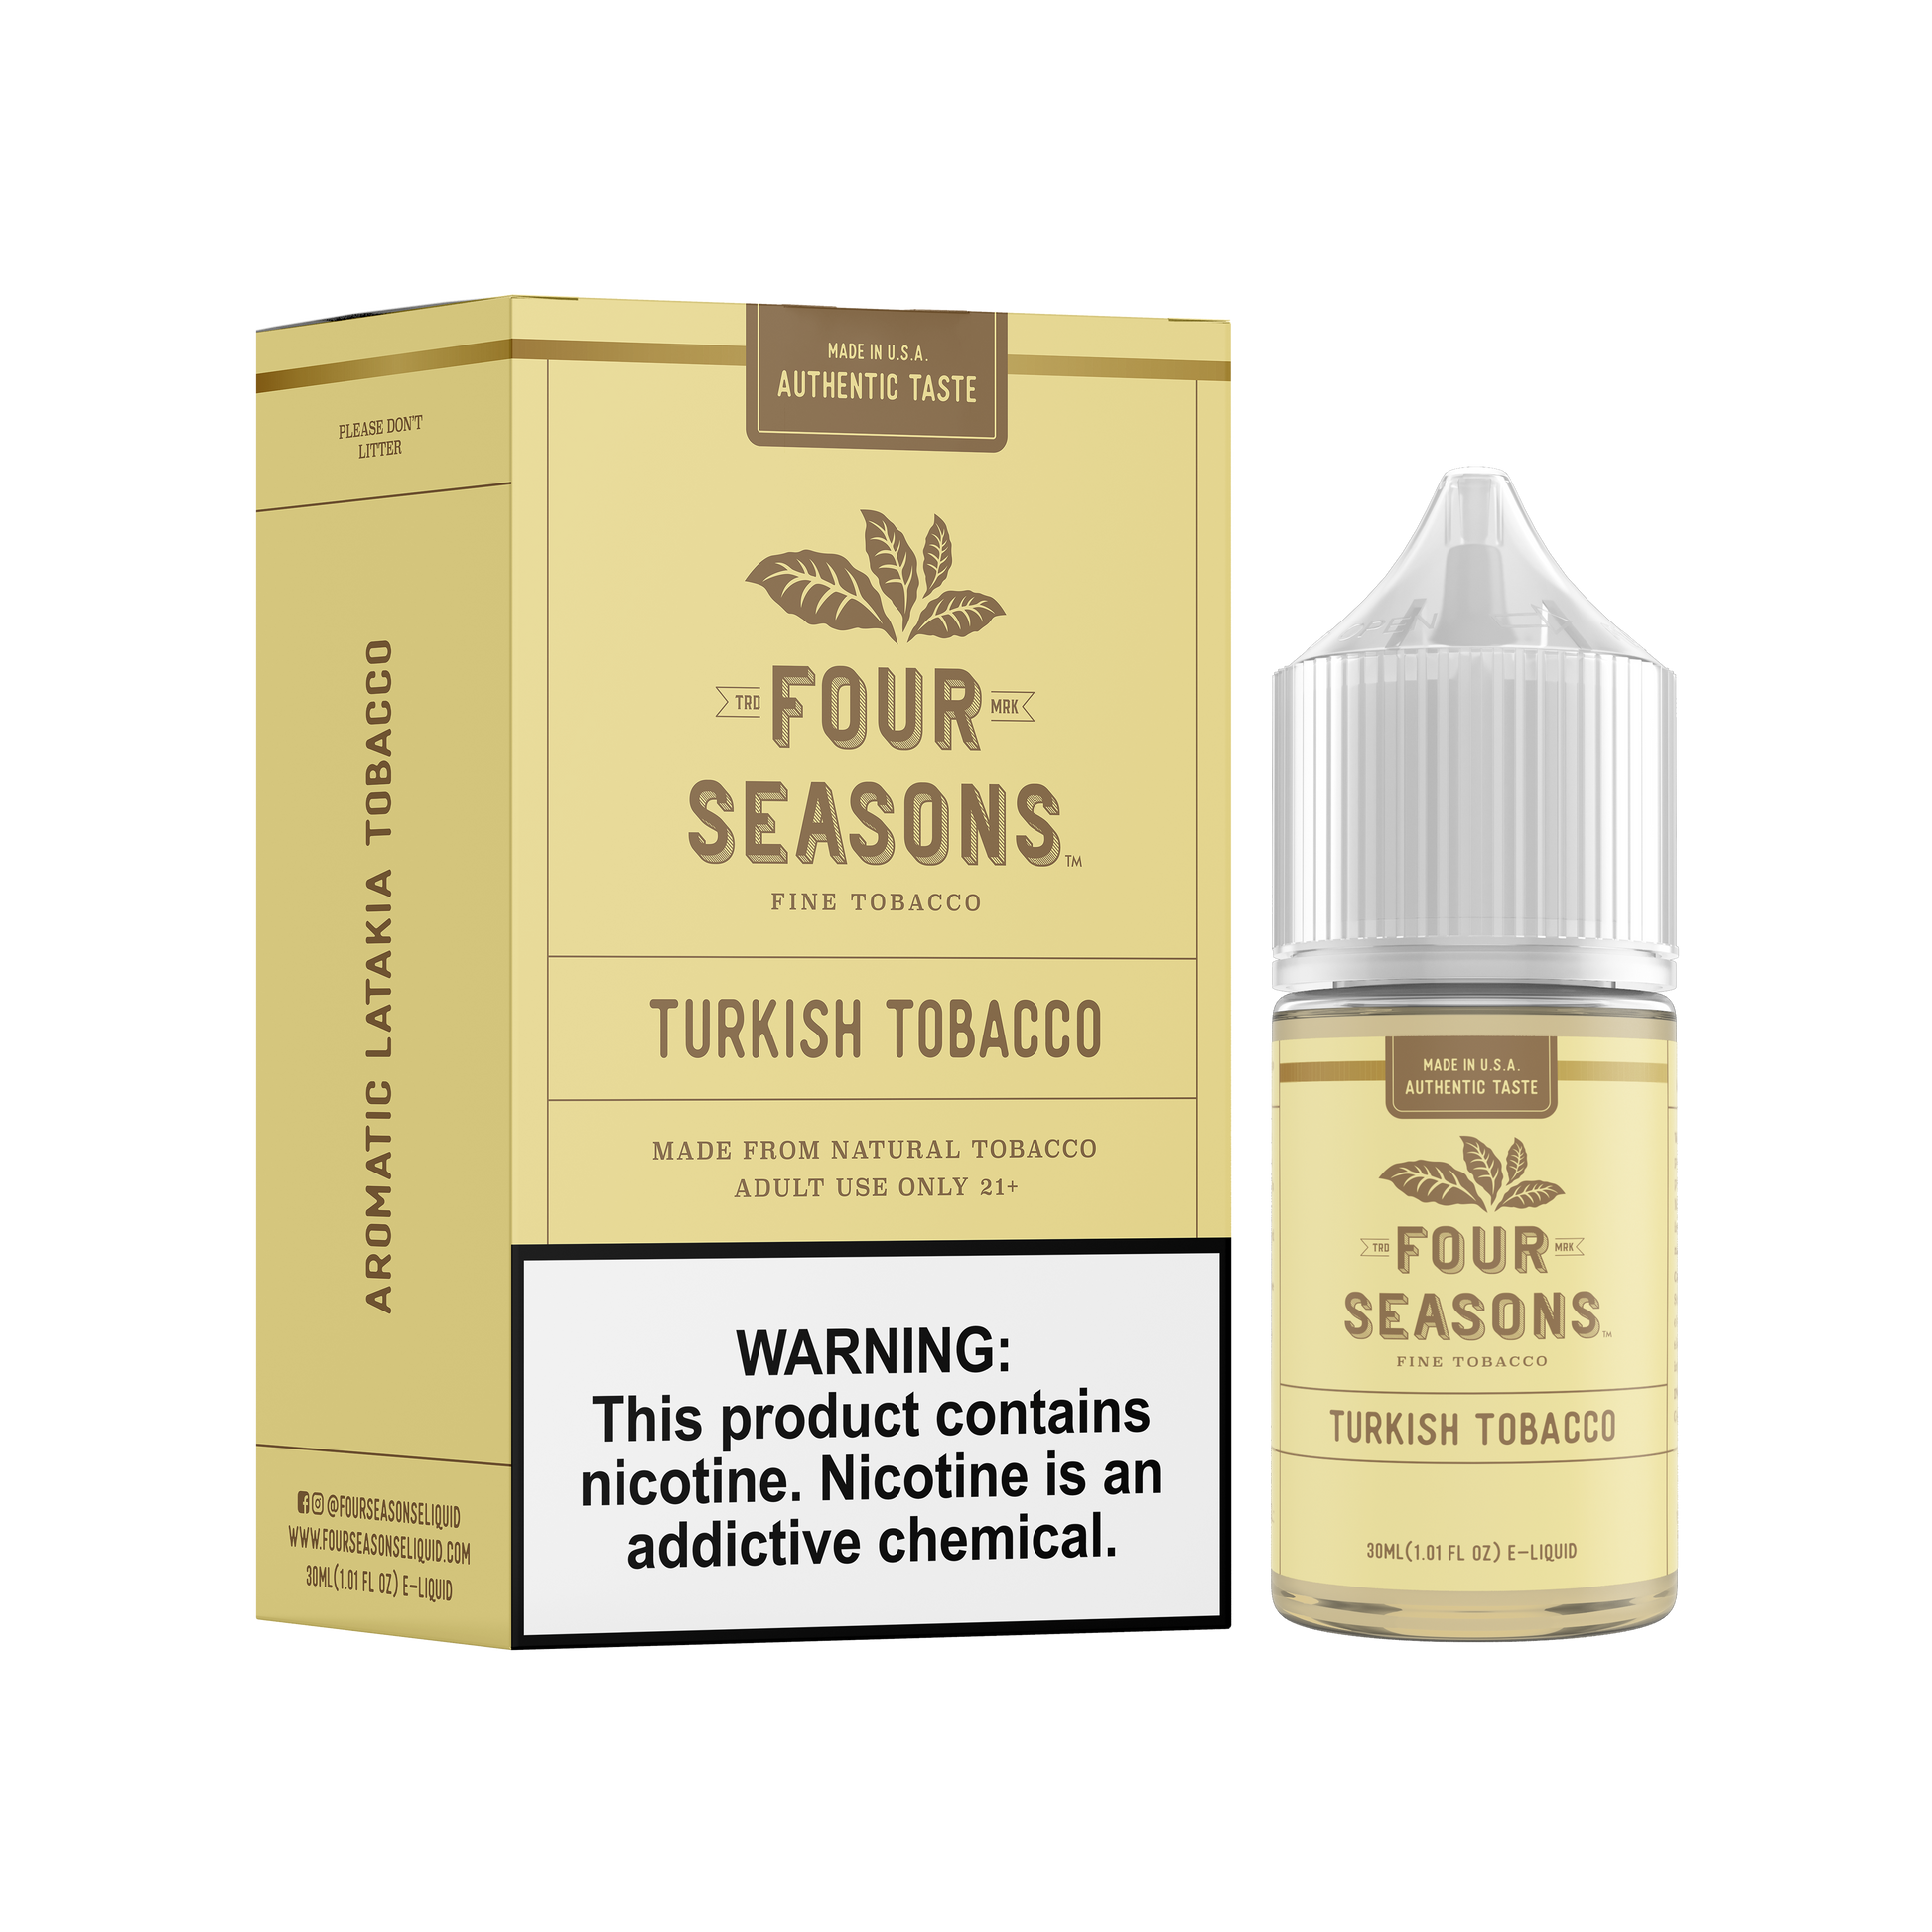 Turkish Tobacco by Four Seasons Free Base Series 30ML with packaging